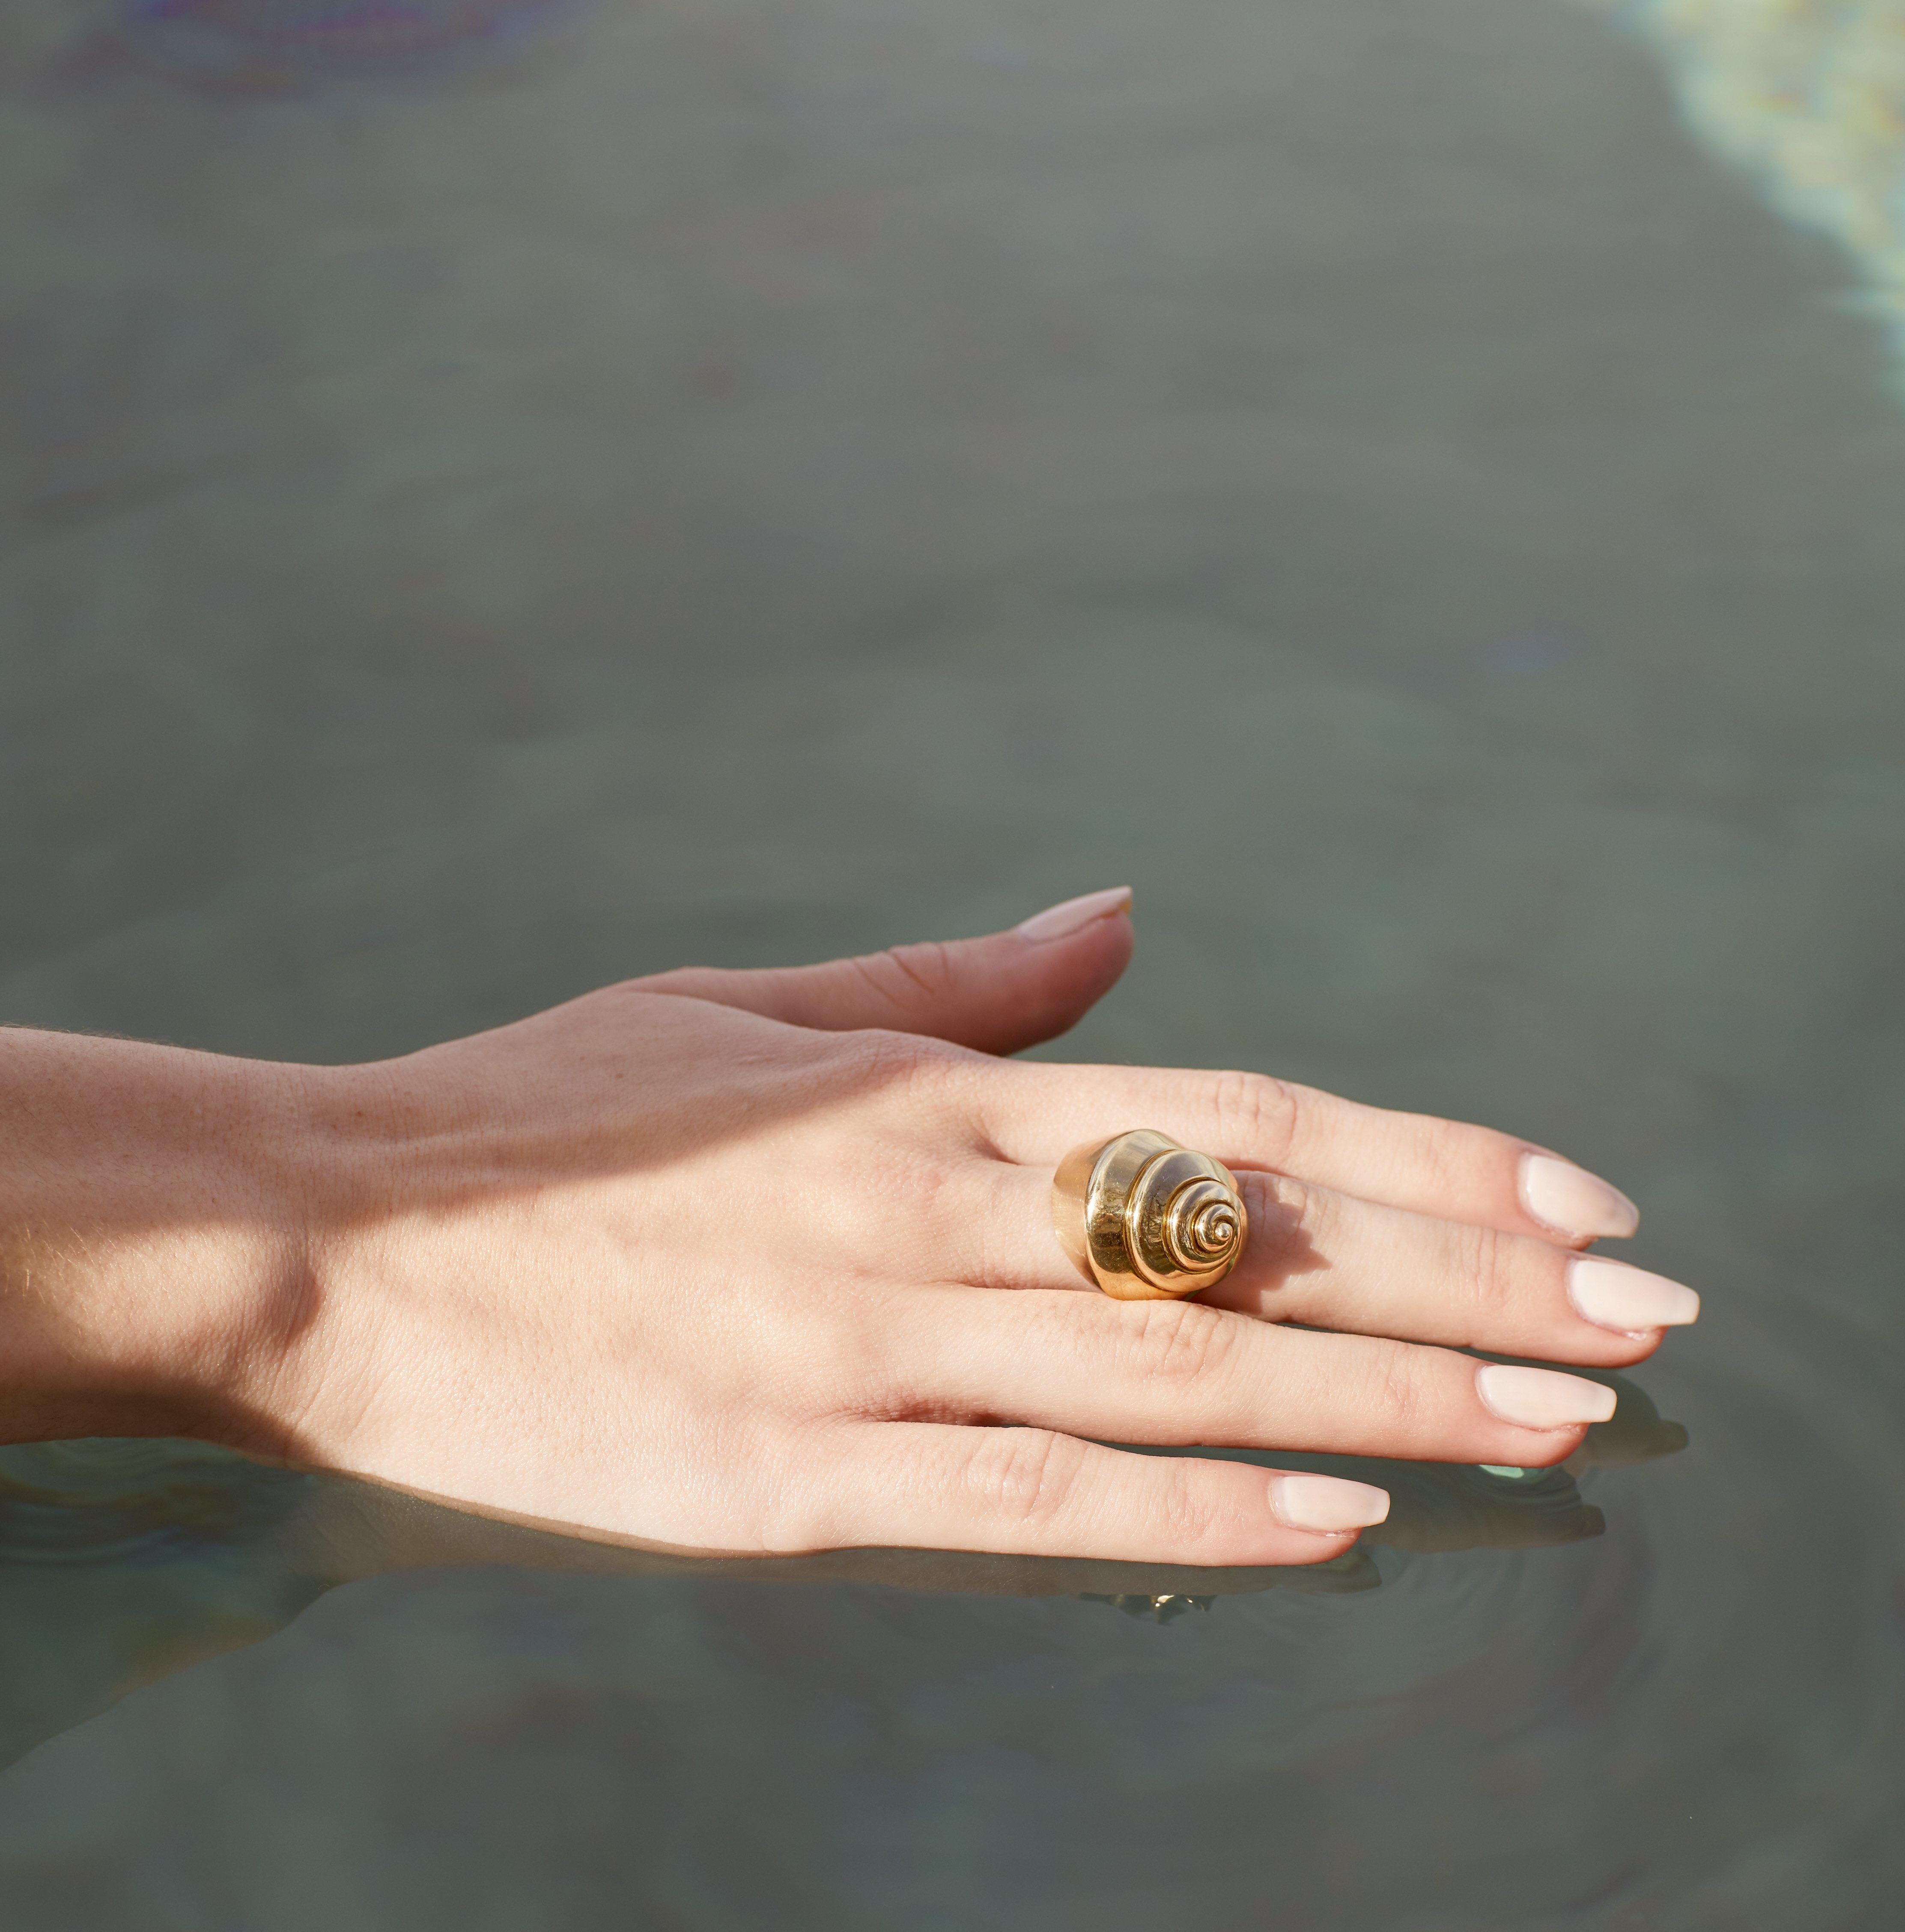 Sculptural Turbo shell ring.
14K gold plated band. 
An everyday statement piece.
Size 7.
Custom sizing available.
Each Jacqueline Rose piece is handcrafted in Los Angeles.